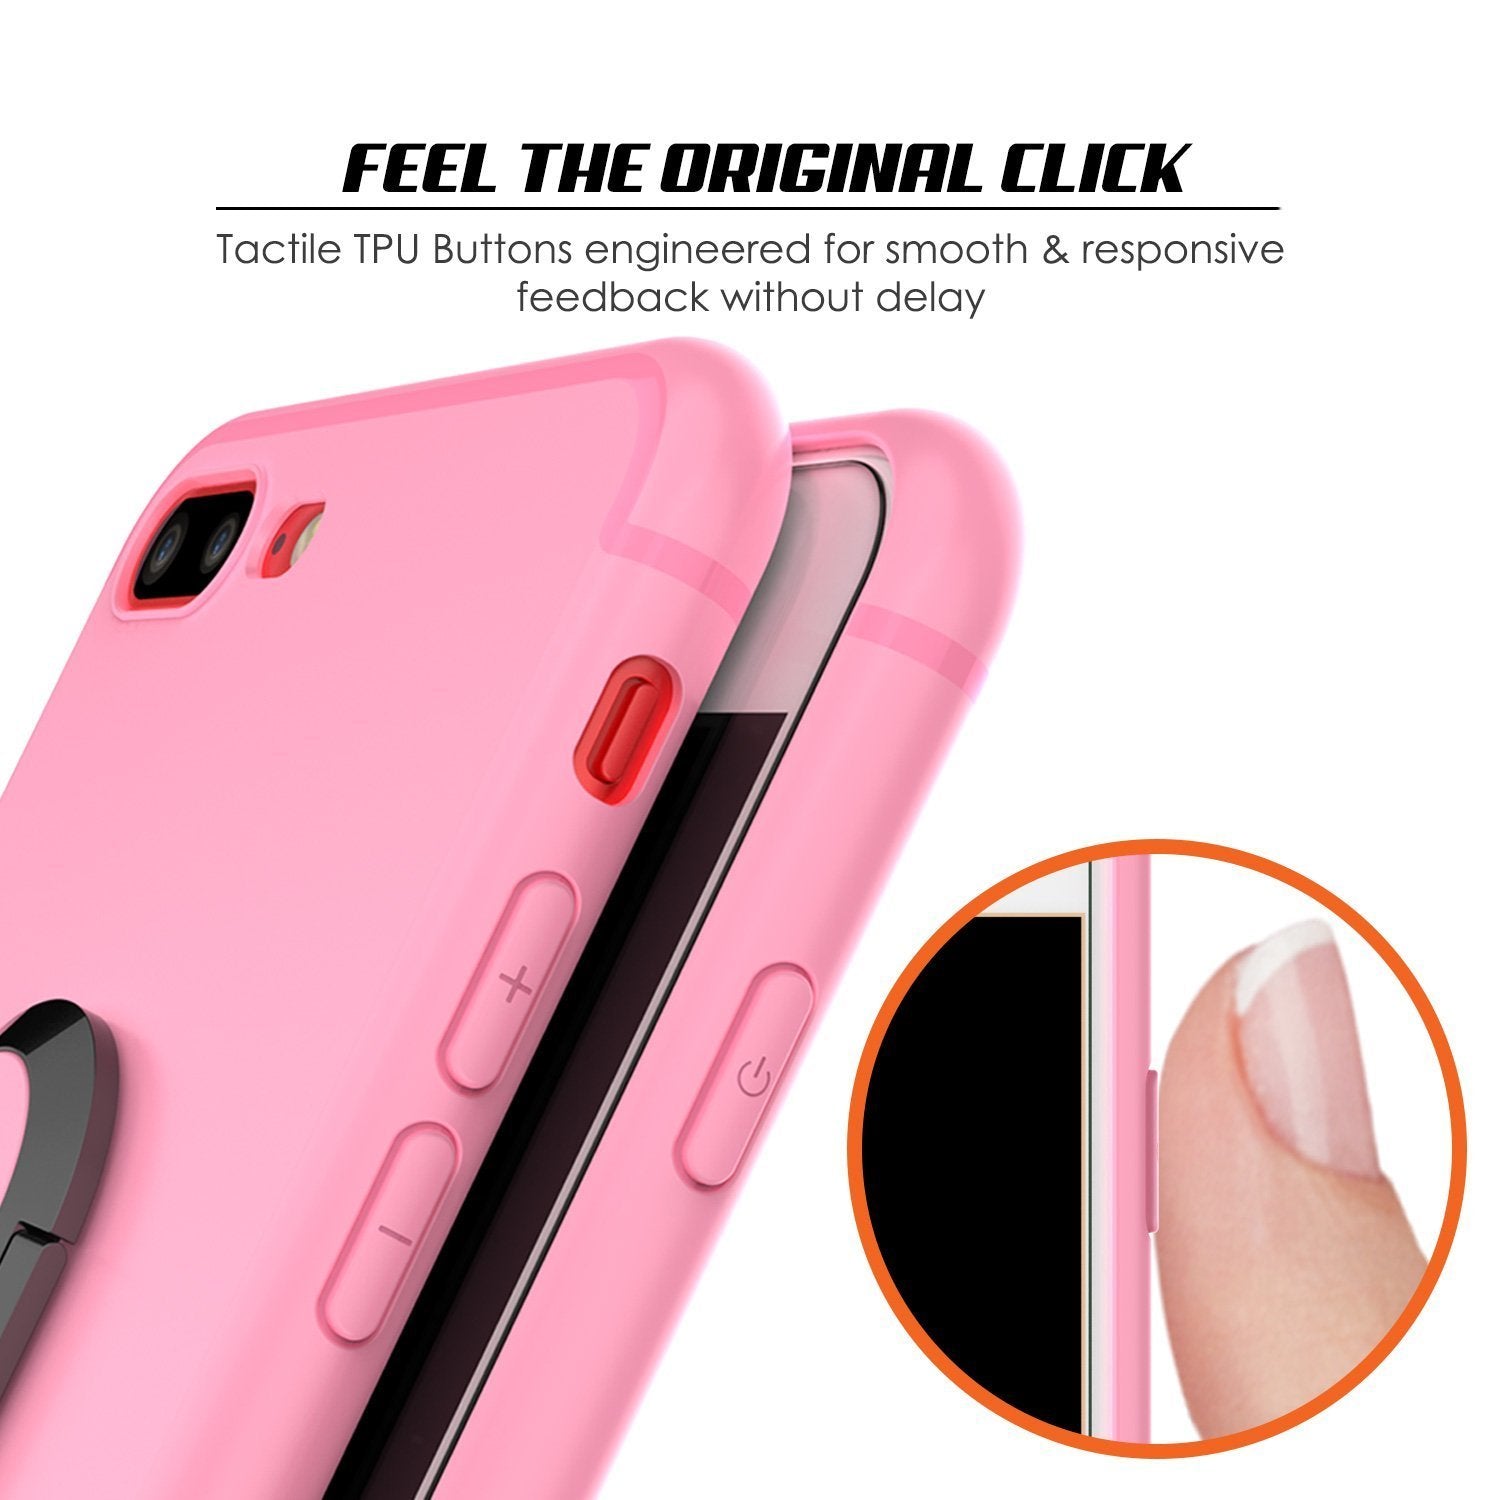 iPhone 8 Plus Case, Punkcase Magnetix Protective TPU Cover W/ Kickstand, Ring Grip Holder & Metal Plate for Magnetic Car Phone Mount PLUS Tempered Glass Screen Protector for Apple iPhone 7+/8+ [Pink]